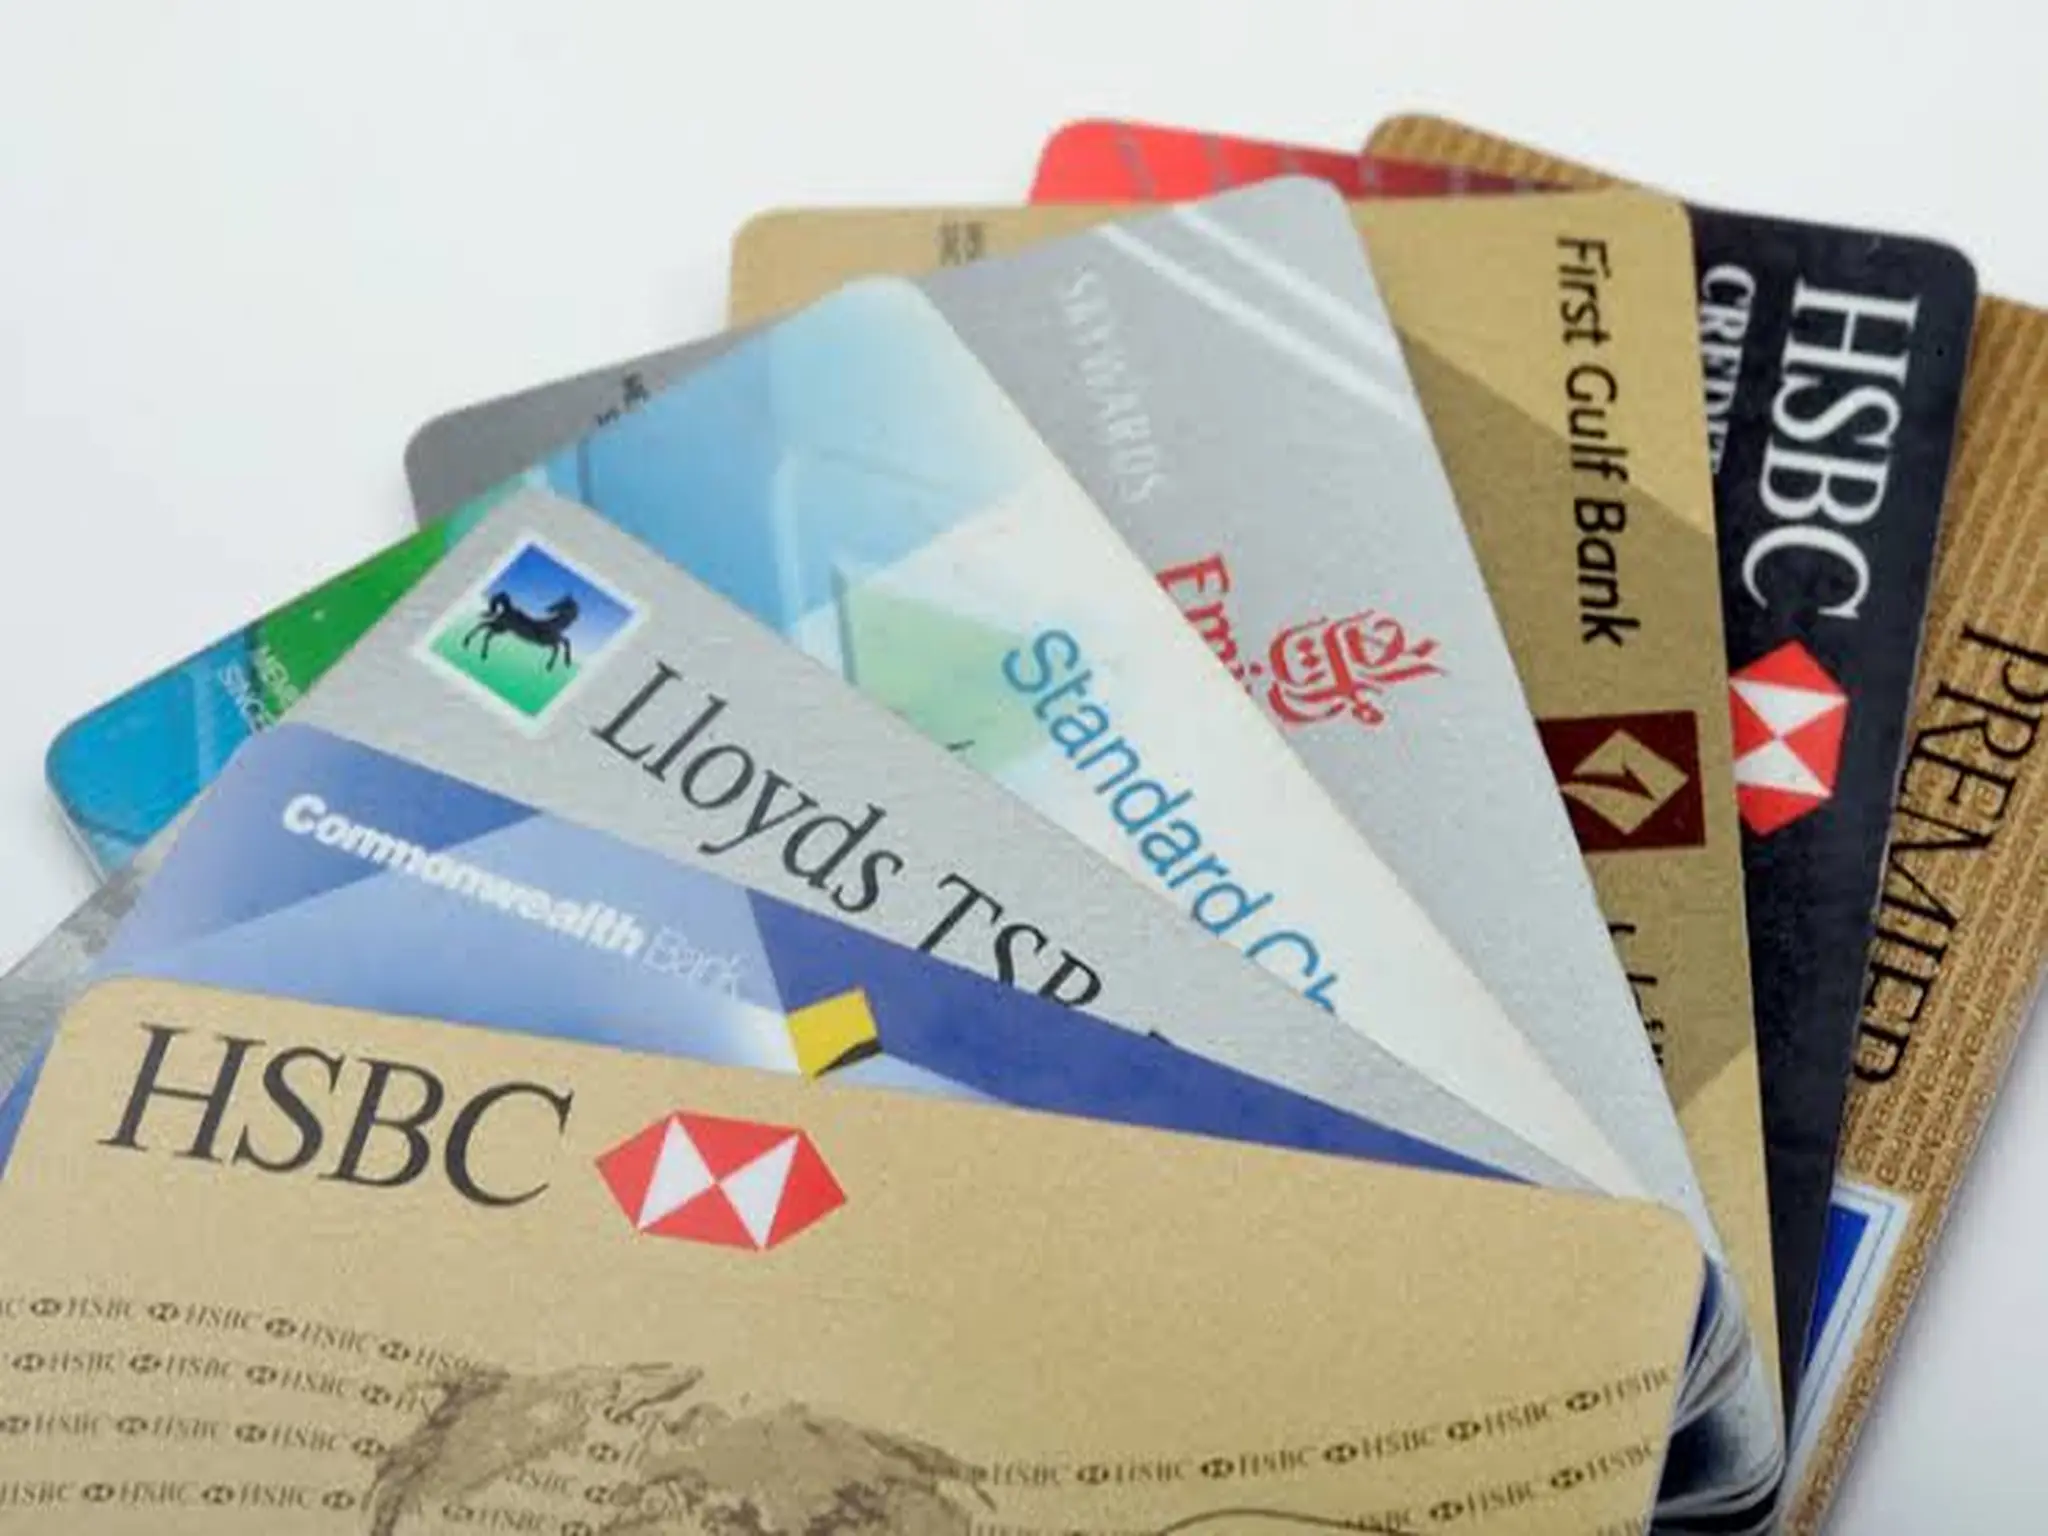 UAE banks put a new system for credit cards